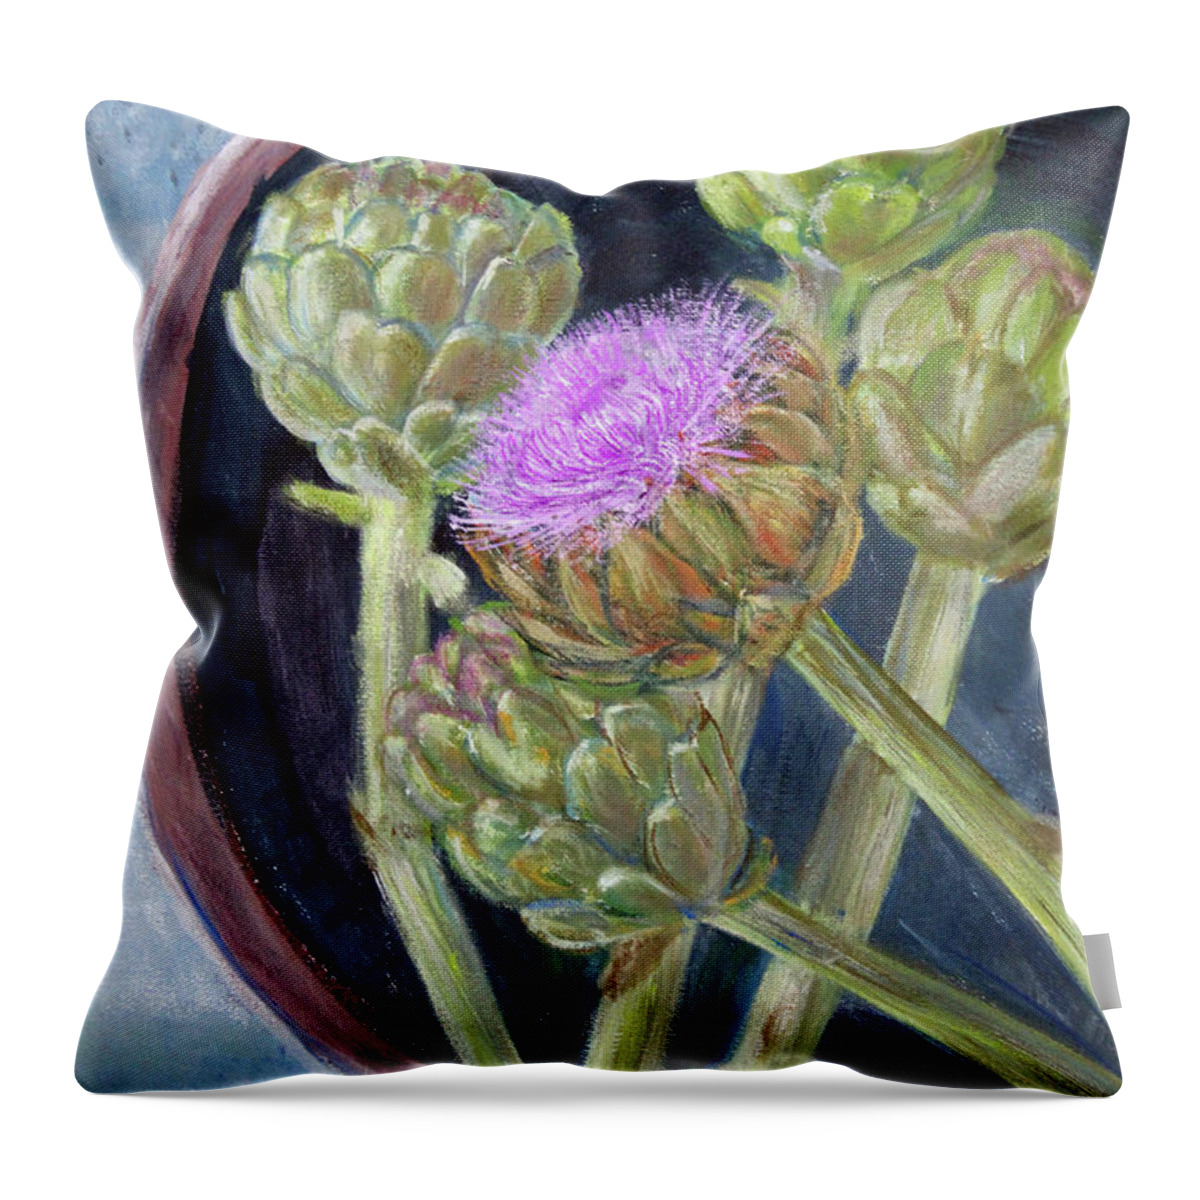 Still Life Throw Pillow featuring the painting Artichoke In Bloom by Lyric Lucas